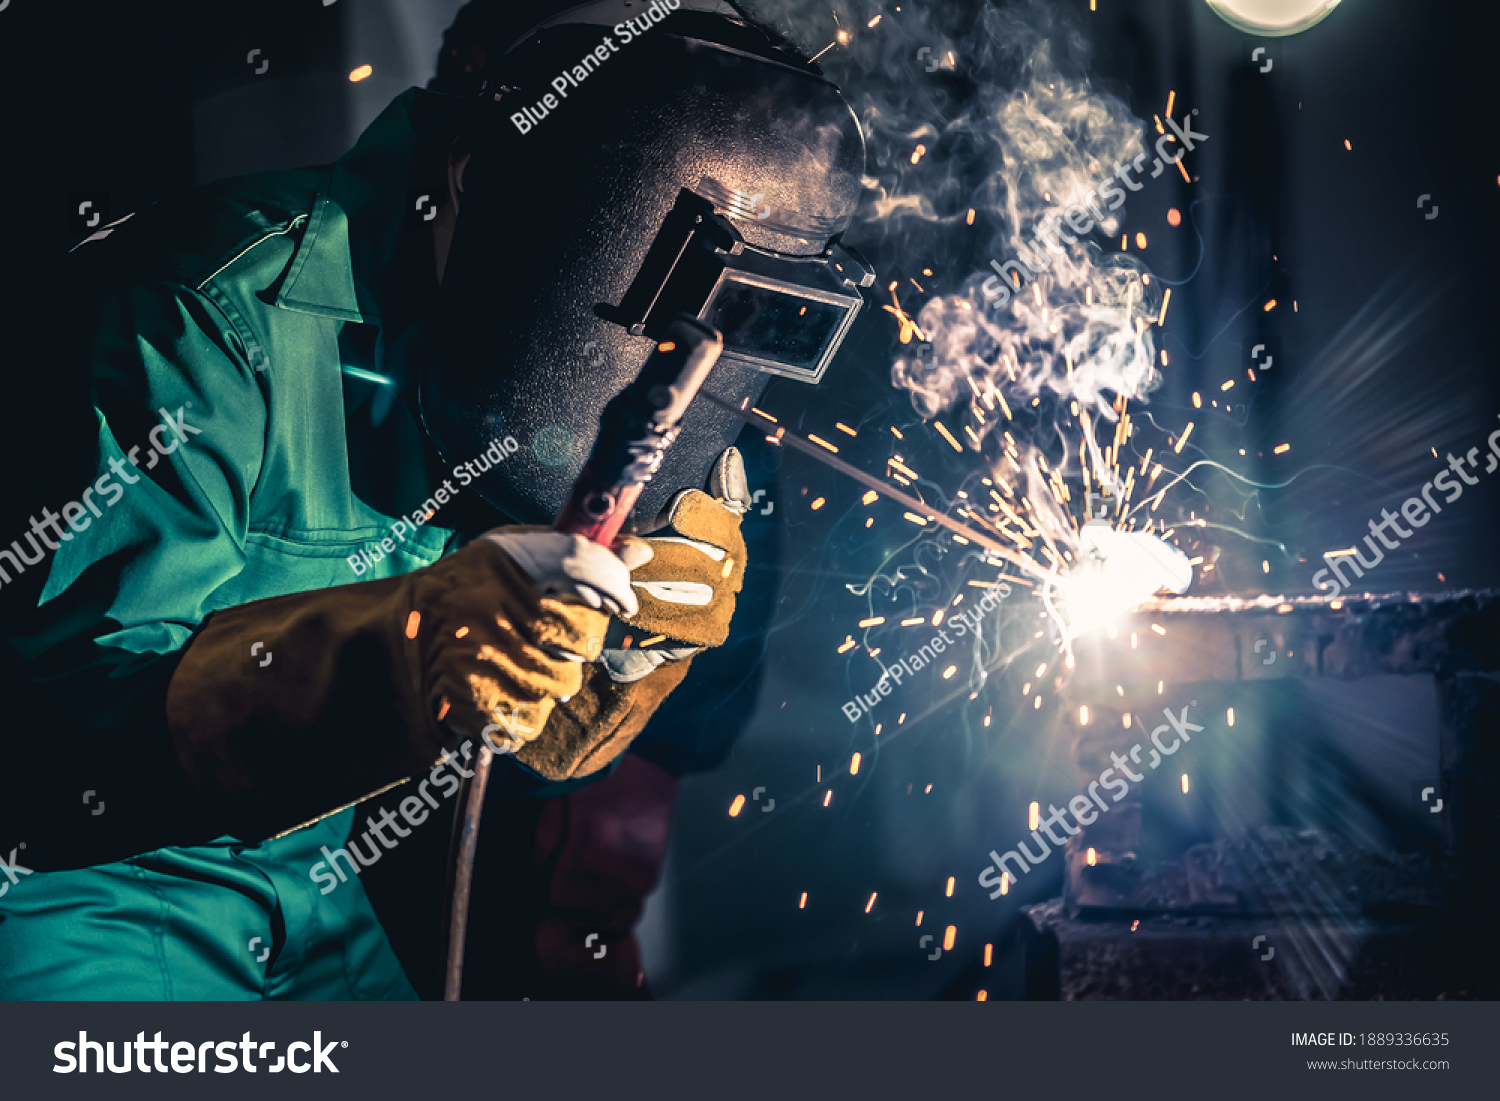 Metal welding steel works using electric arc welding machine to weld steel at factory. Metalwork manufacturing and construction maintenance service by manual skill labor concept. #1889336635